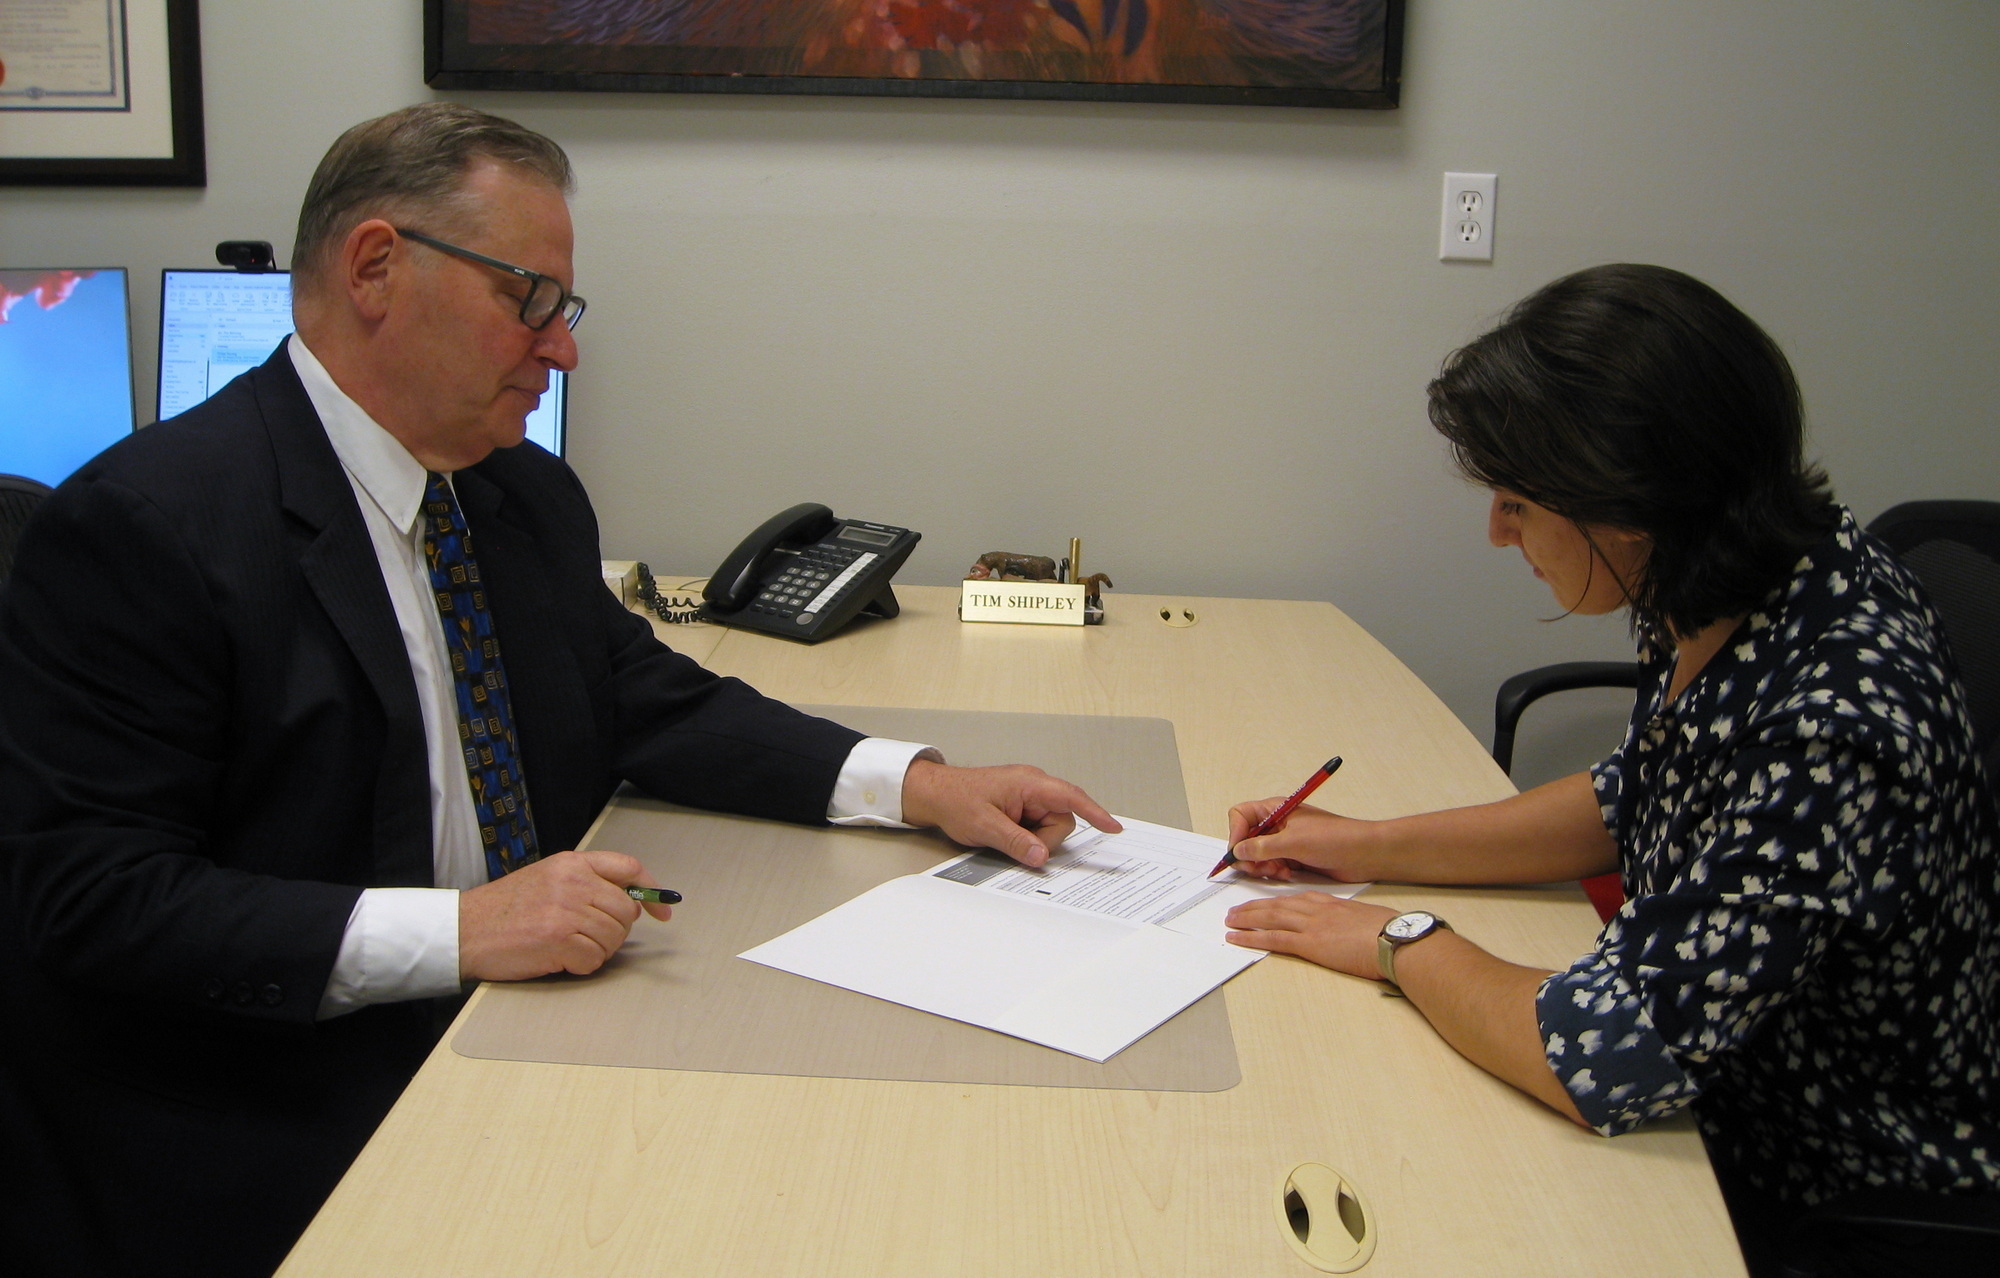 Tim Shipley and mock customer signing a will that they had just wrote and created.